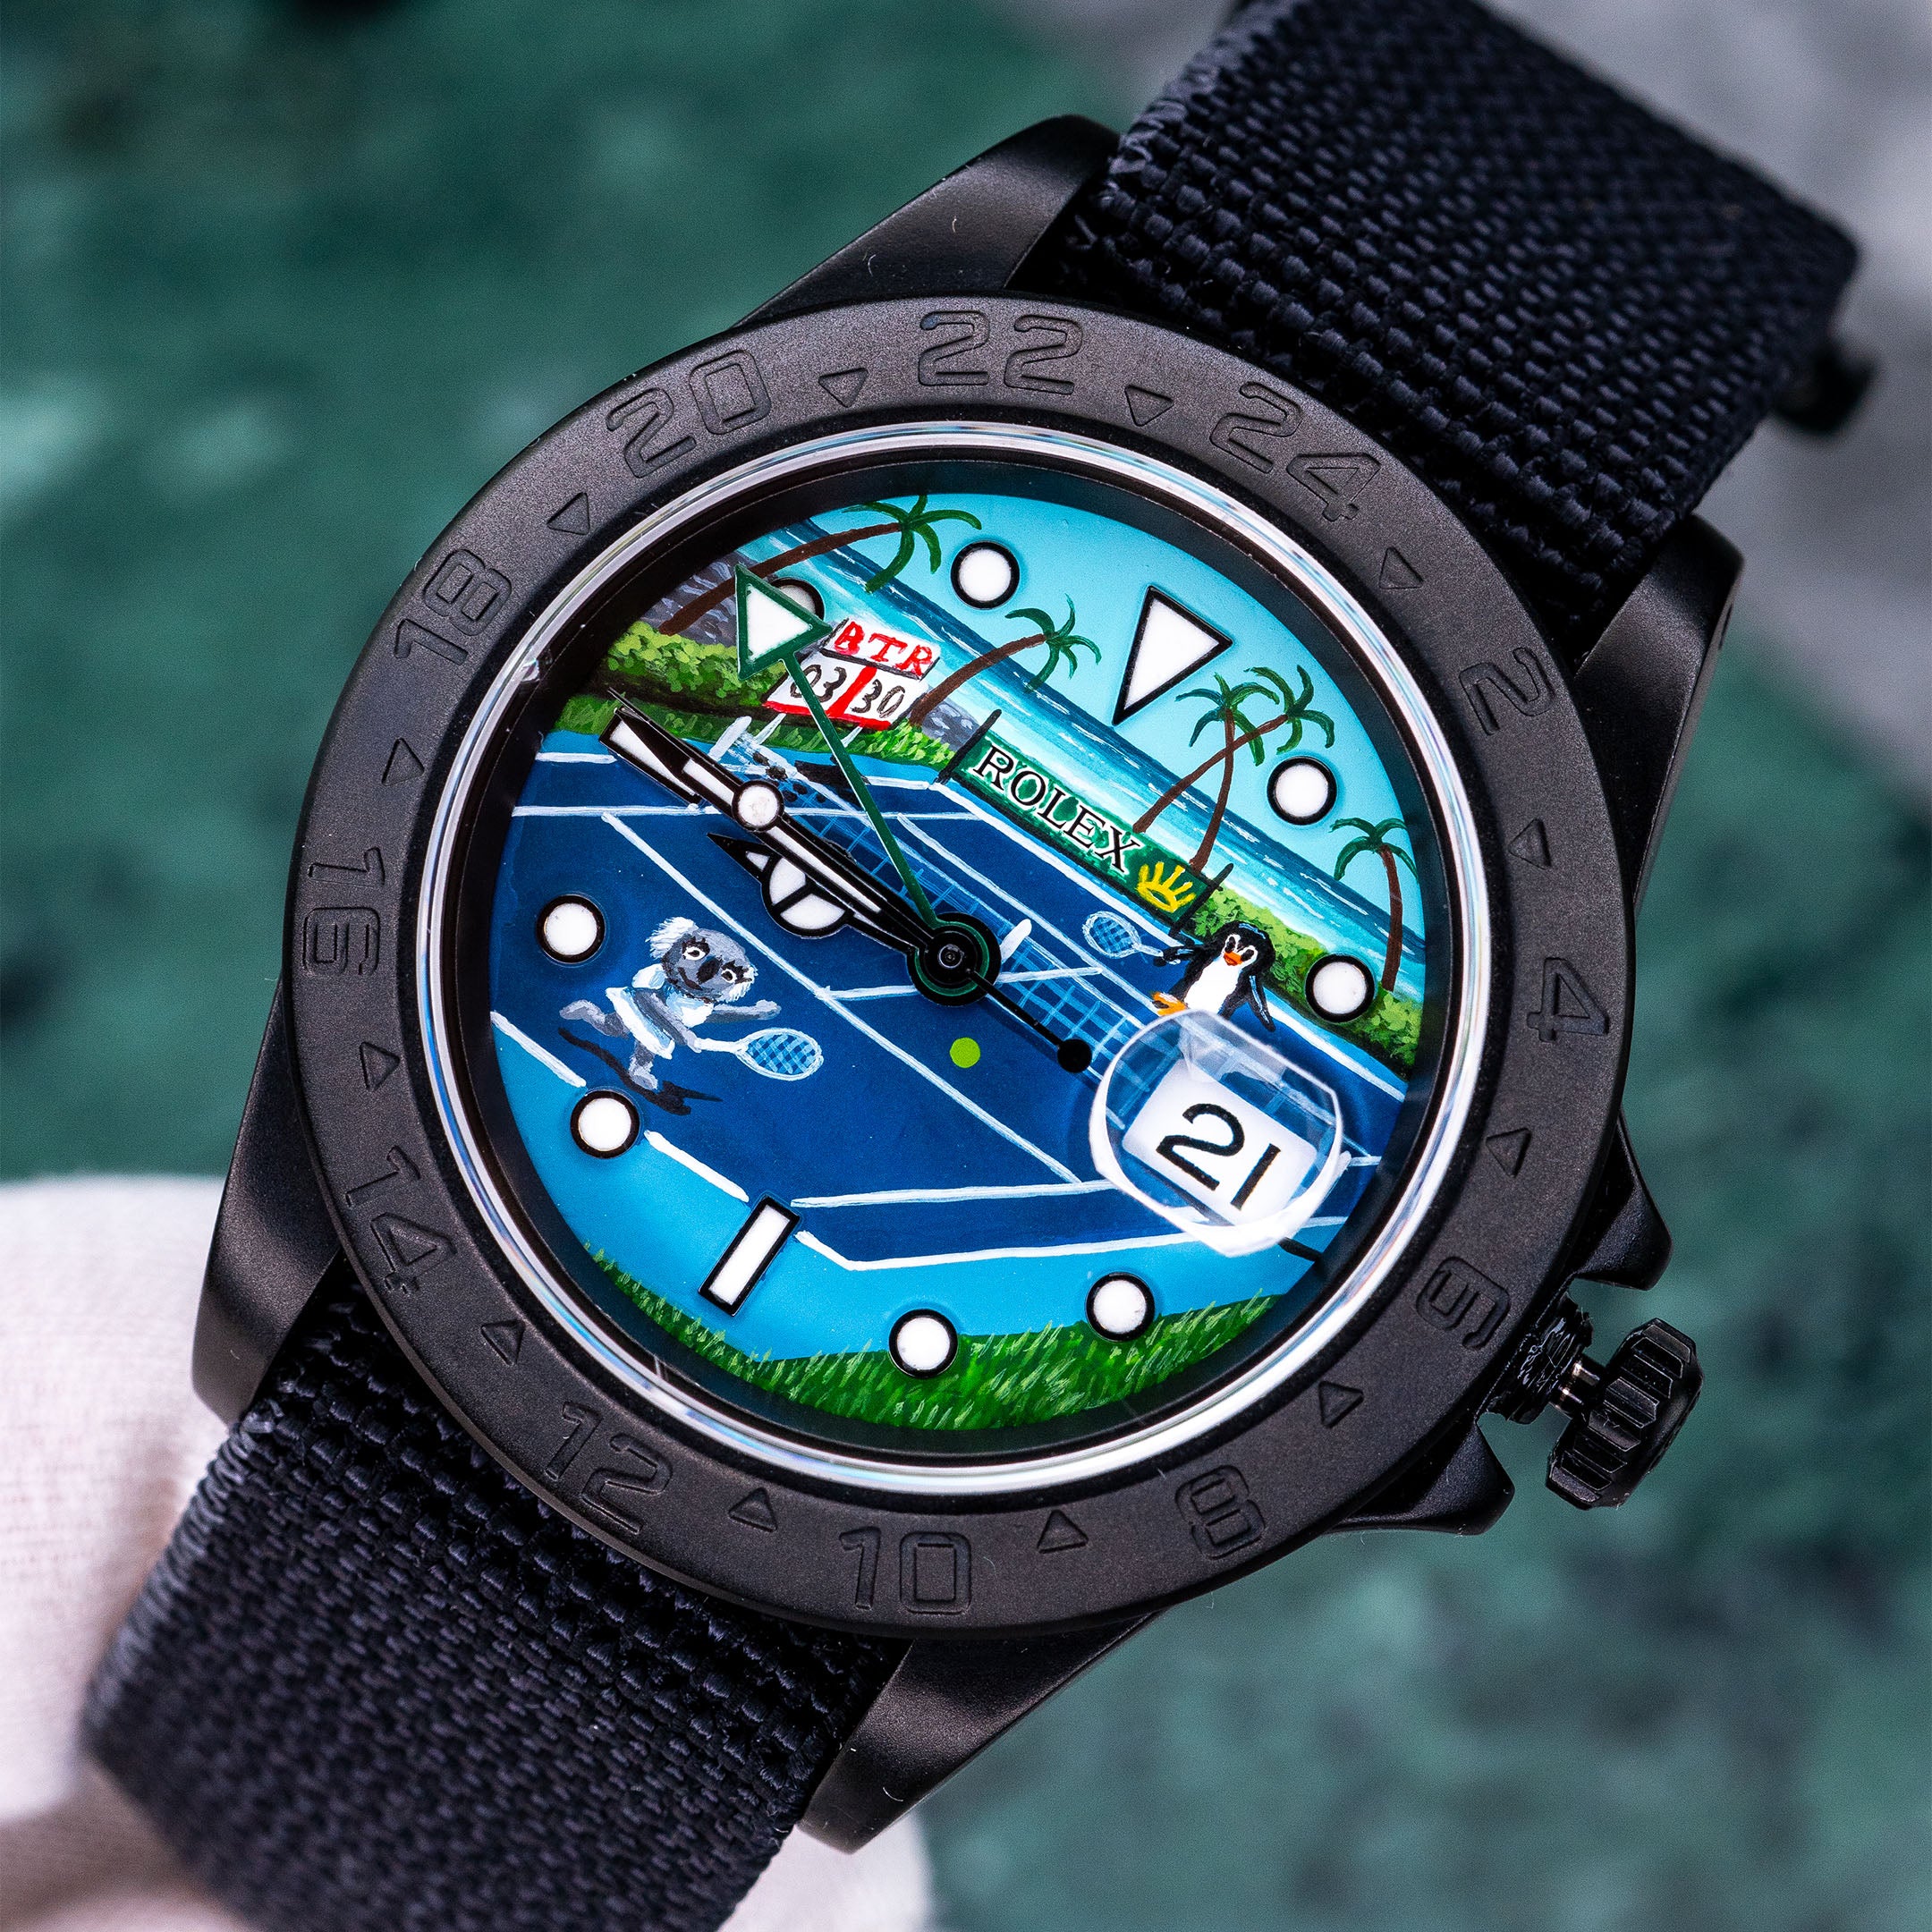 Bespoke watch with hand-painted dial, a wearable masterpiece of art